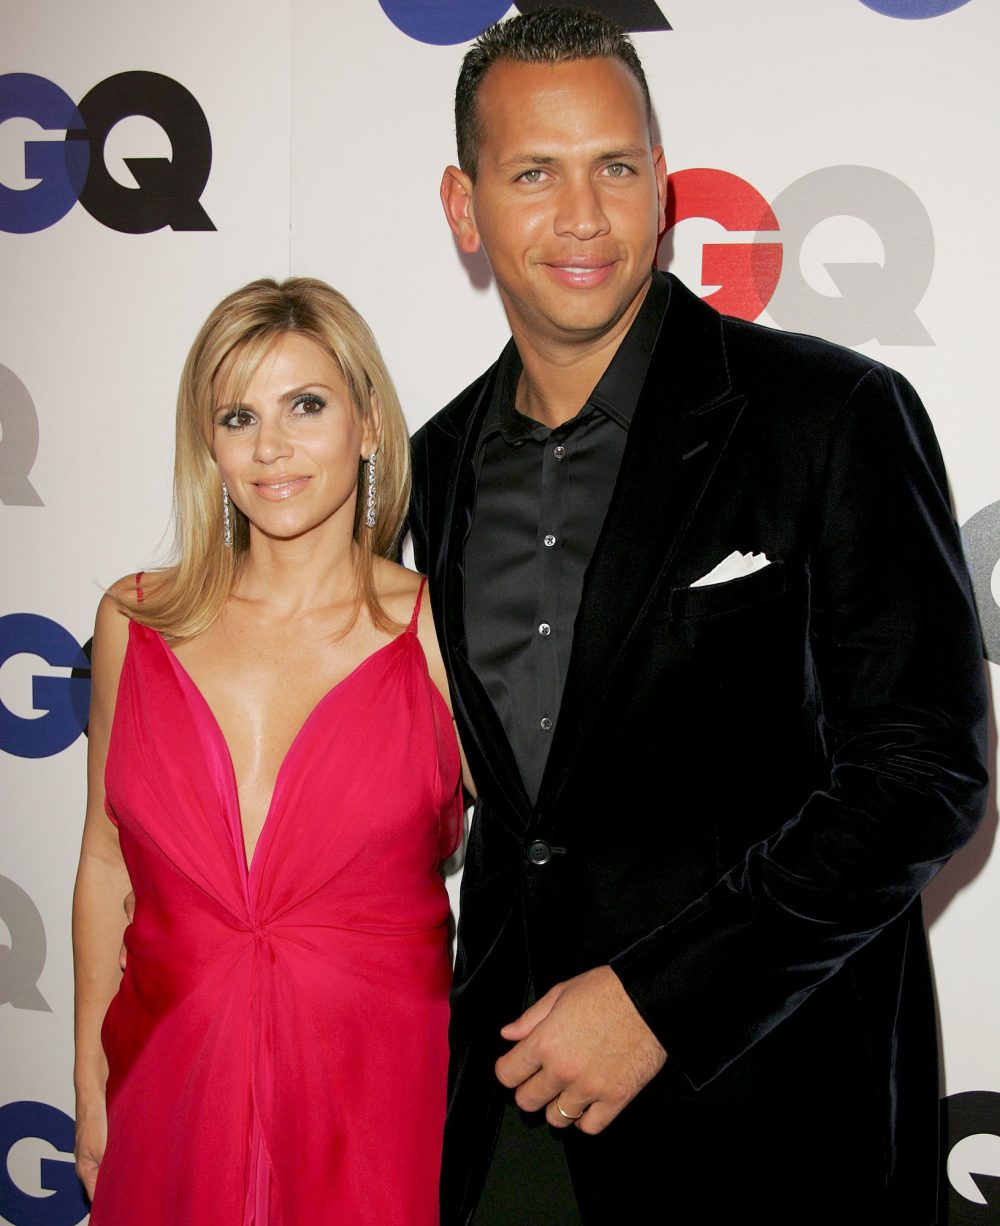 Alex Rodriguez Talks Navigating Coparenting 2 Daughters With Ex-Wife Cynthia Scurtis